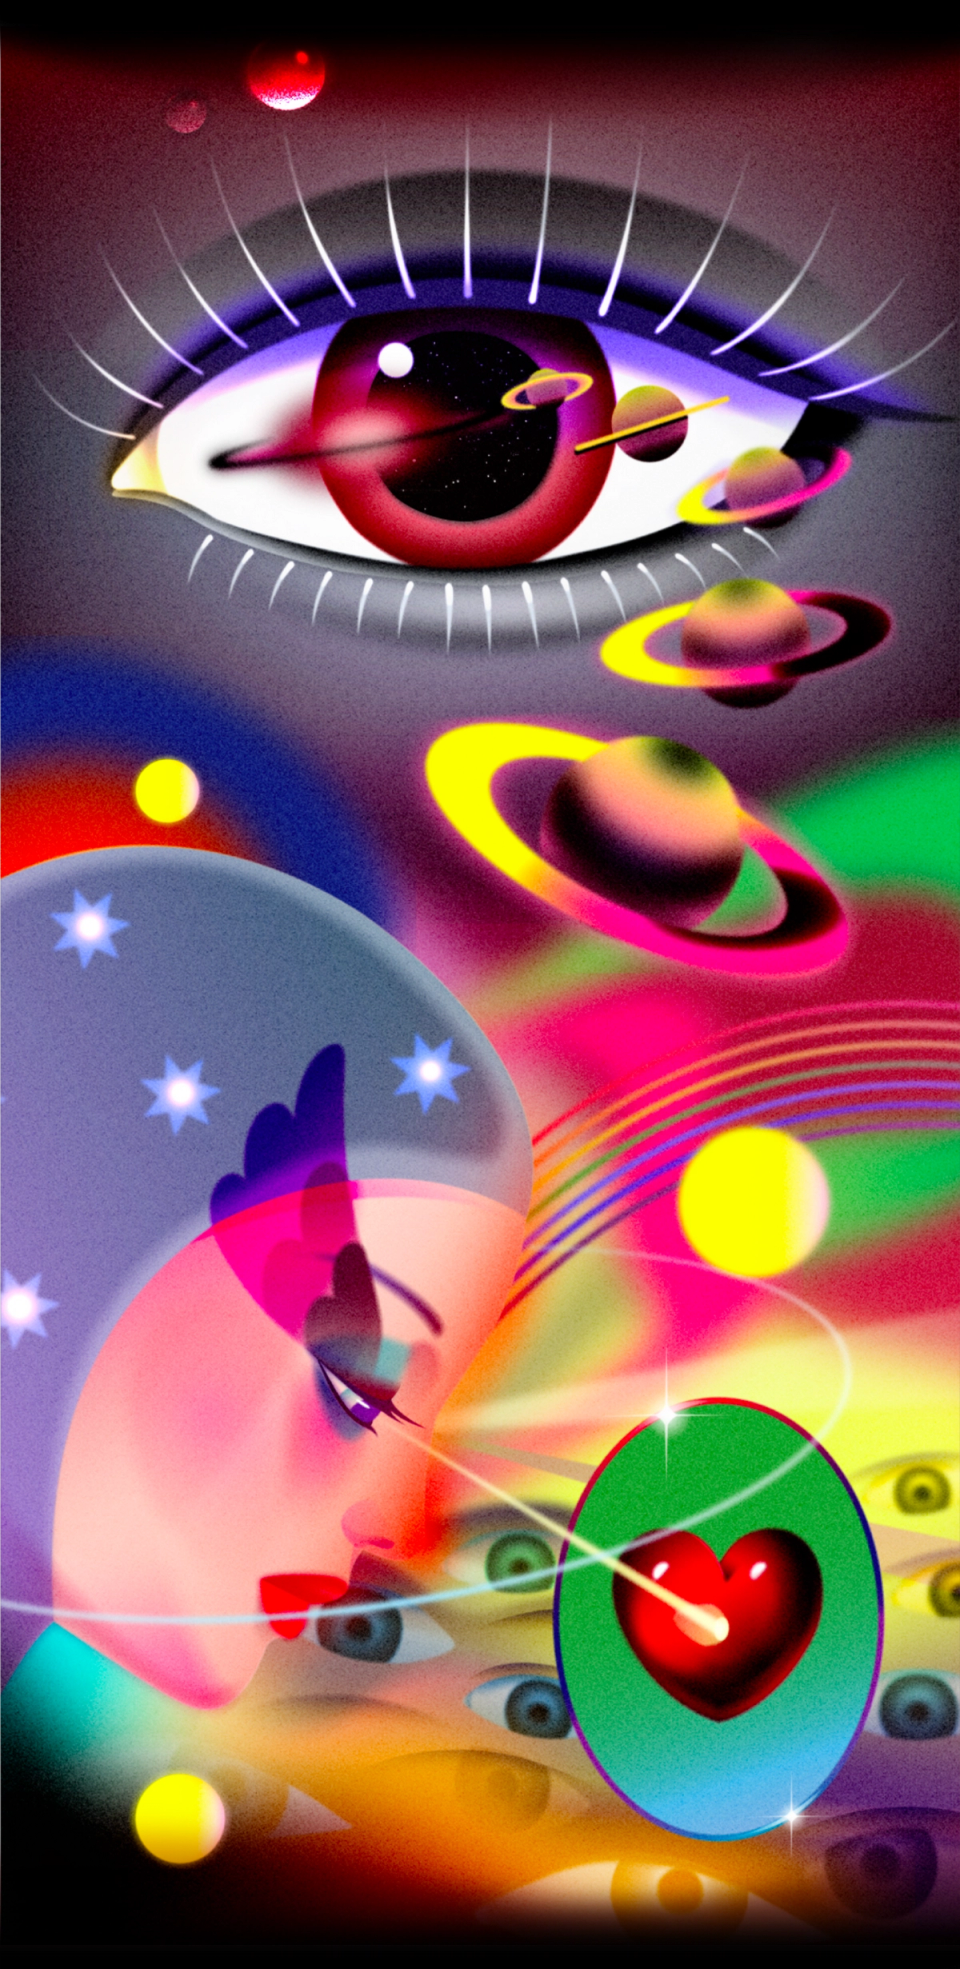 An illustration including; ringed planets floating towards the viewer from a large human eye, a female head in profile, wearing a cap covered in stars, and numerous human eyes and astral shapes.